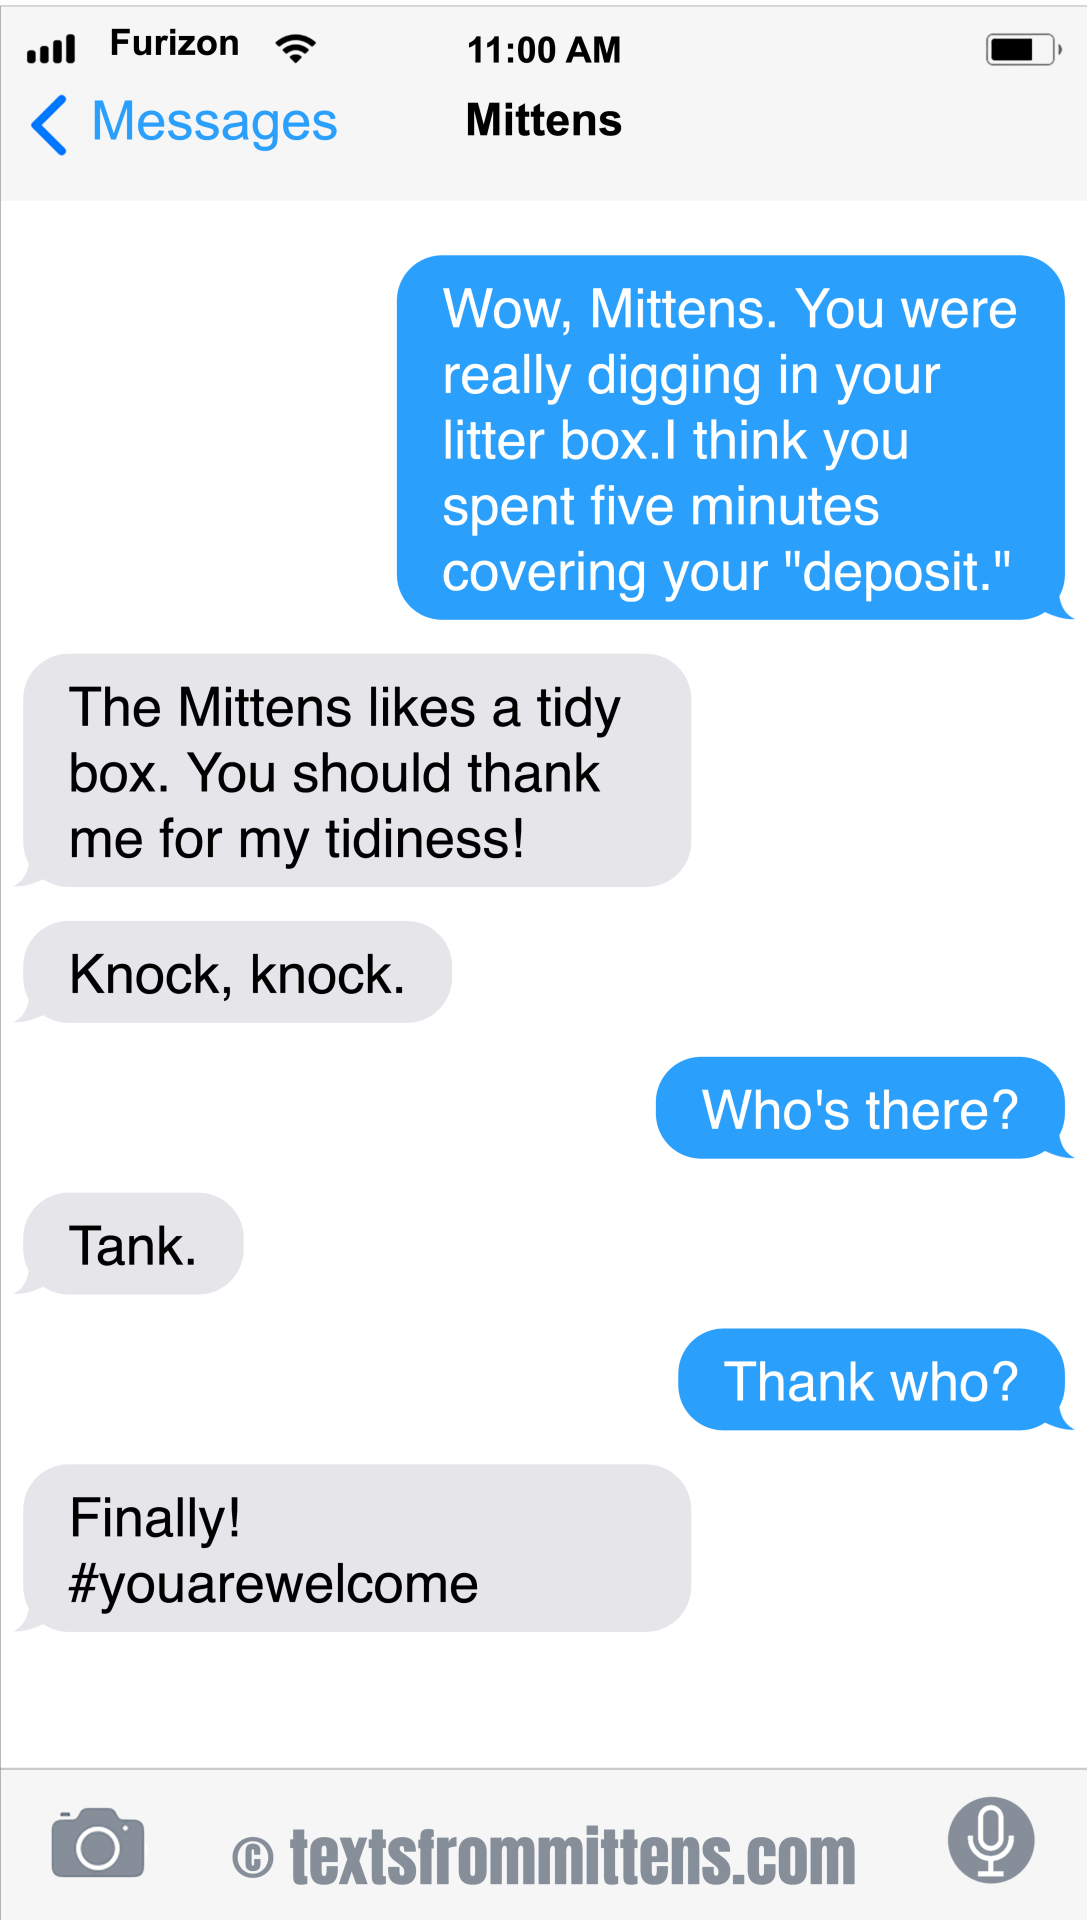 Texts from Mittens